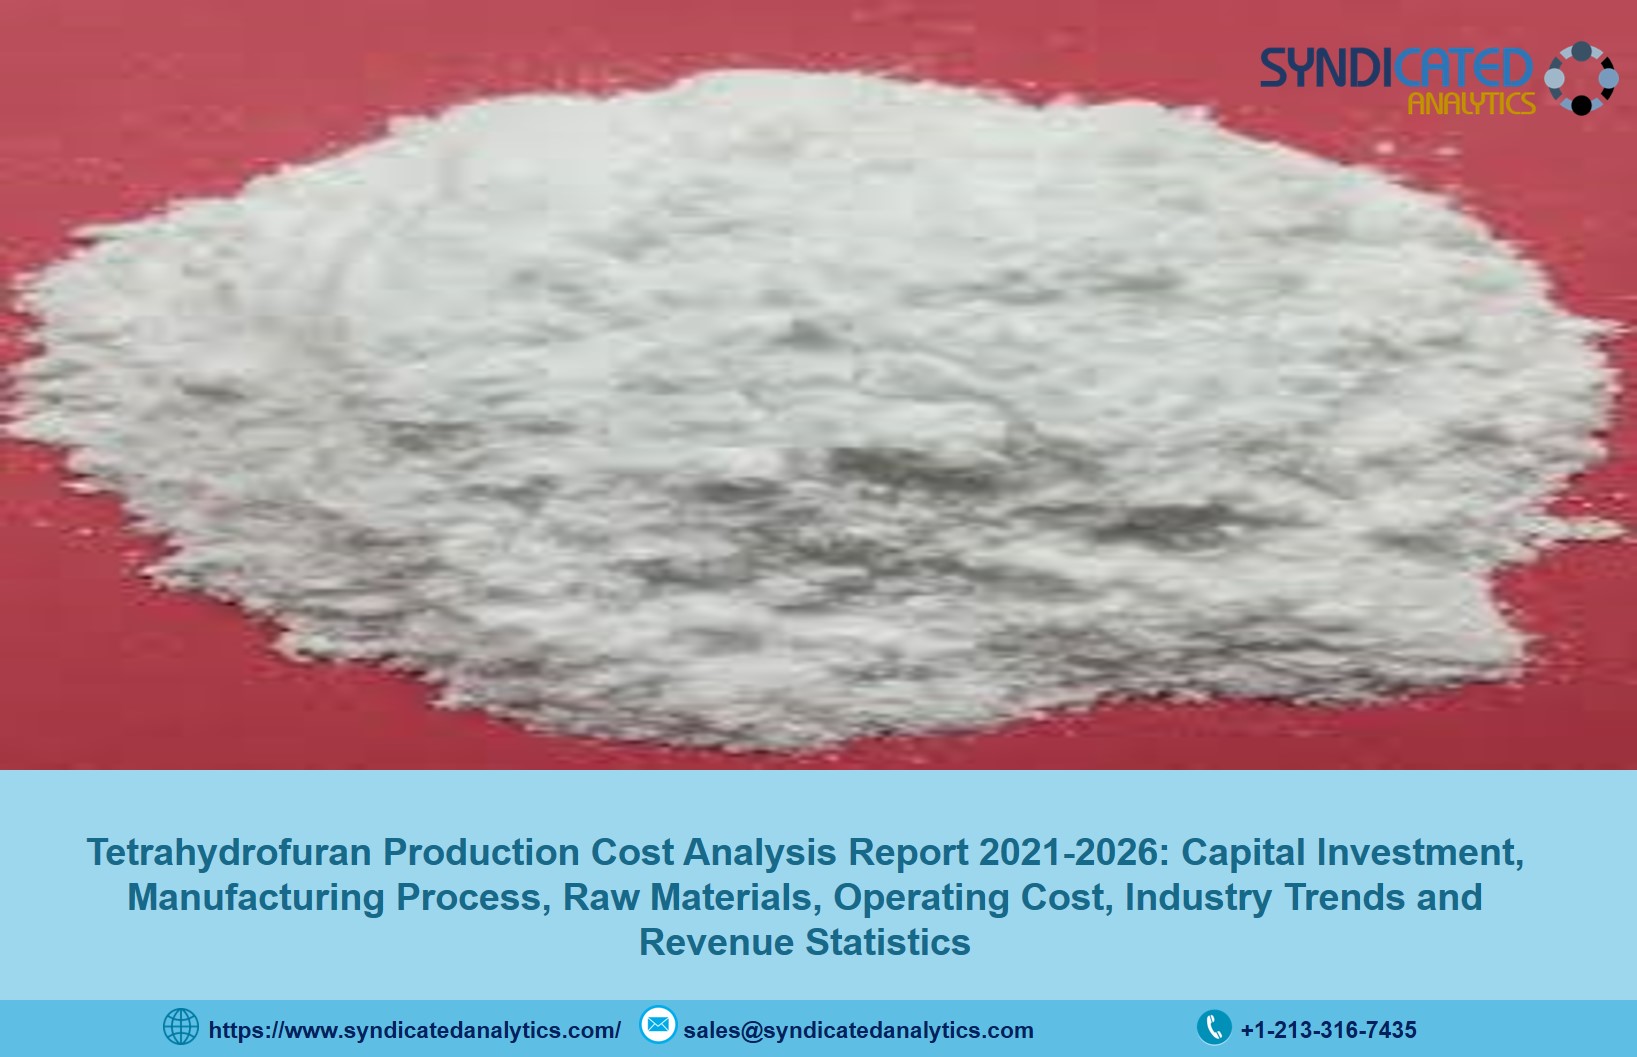 Tetrahydrofuran Production Cost Analysis And Price Trends 2021: Plant Cost, Profit Margins, Industry Trends, Land and Construction Costs, Raw Materials Costs 2026 | Syndicated Analytics